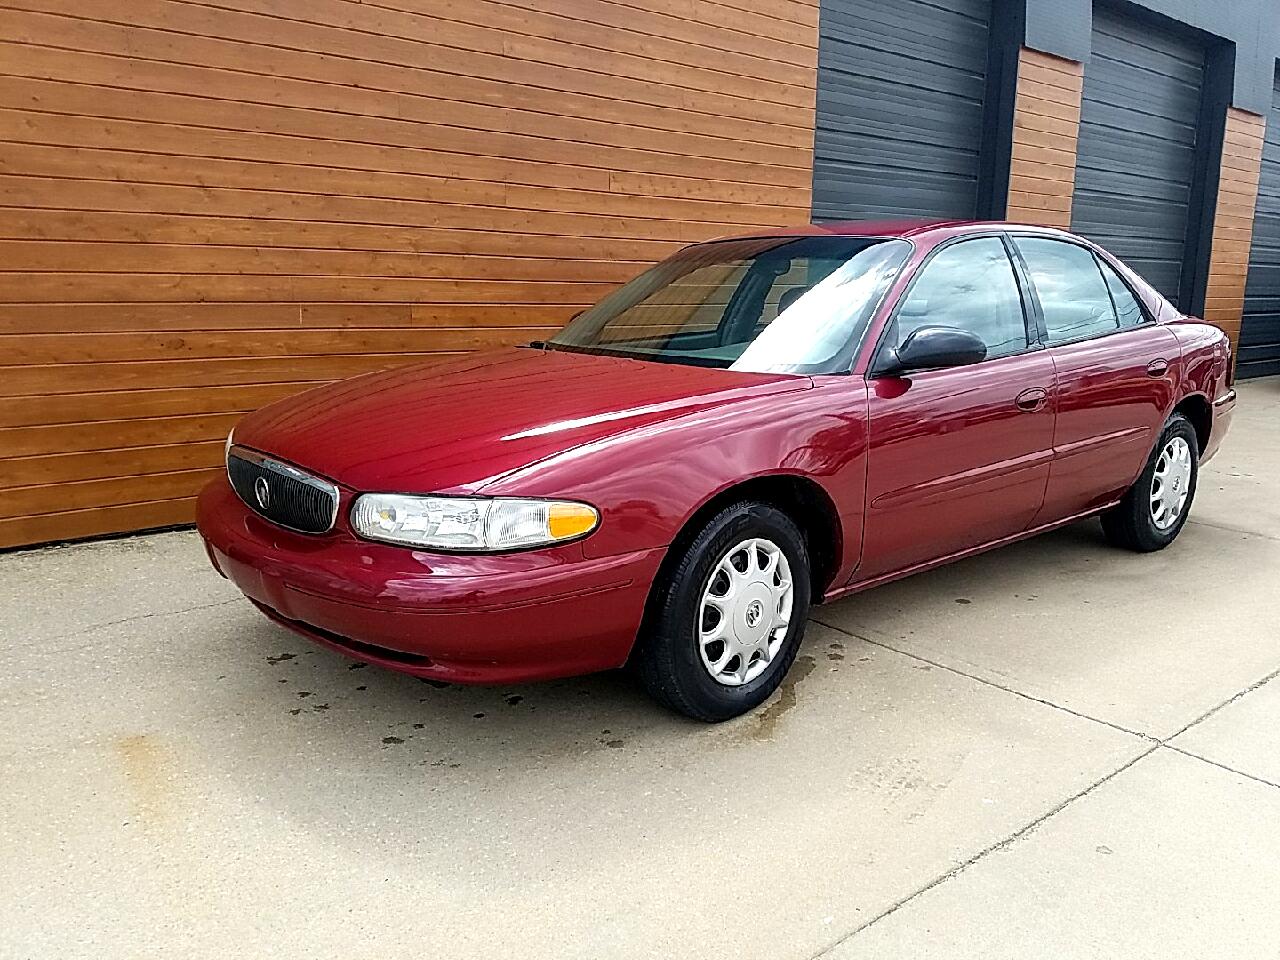 Used 2003 Buick Century Sold in Derby KS 67037 Auto House Of Derby